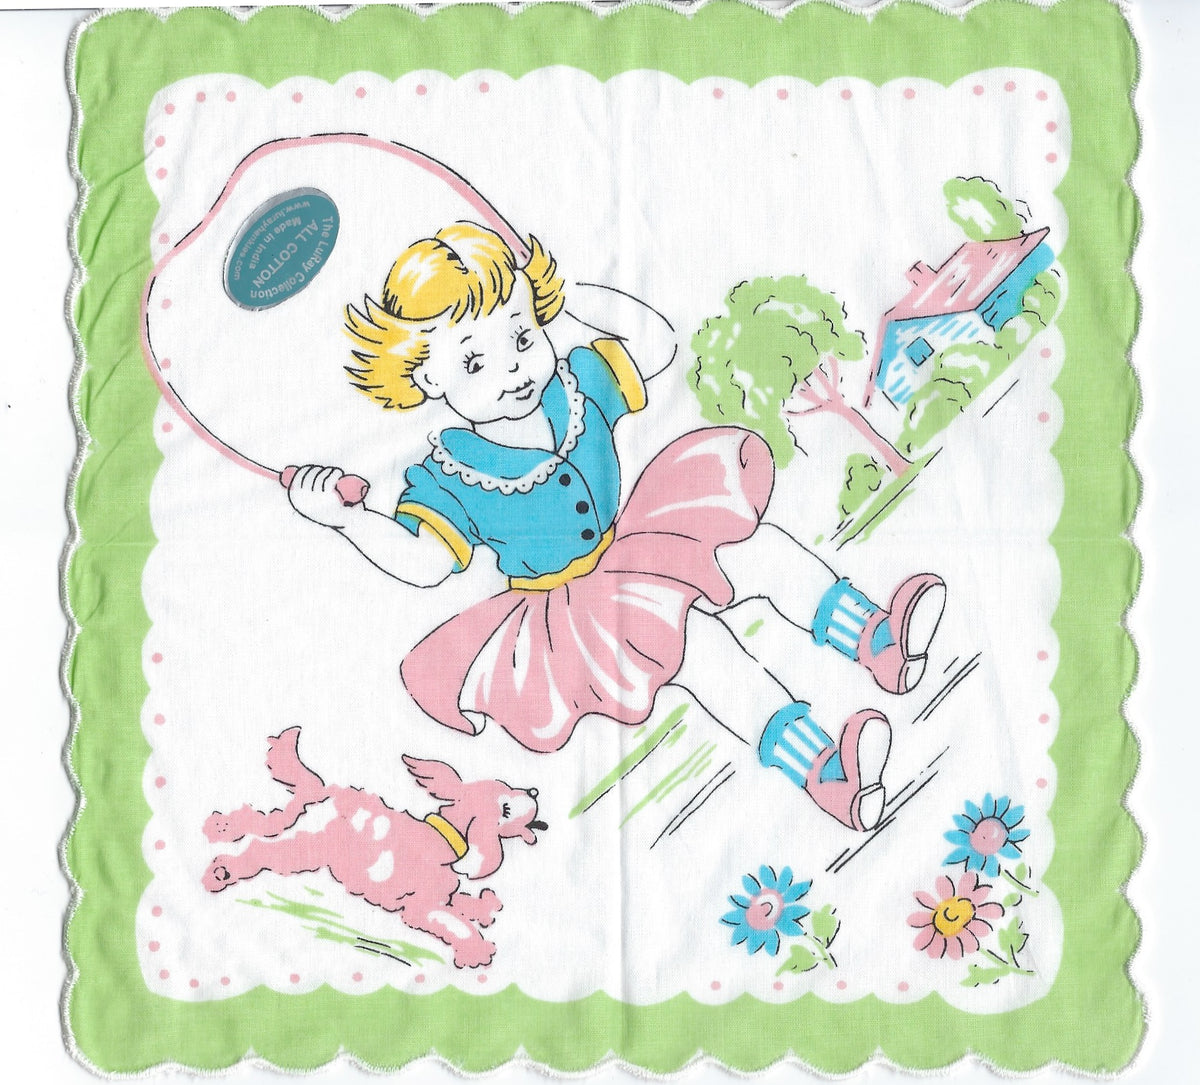 A Vintage-Inspired Hanky - Jump Rope Jane Hanky on 100% pure cotton fabric depicting a young girl with blonde hair wearing a pink dress, chasing a pink rabbit with a butterfly net, surrounded by flowers, on a scalloped.